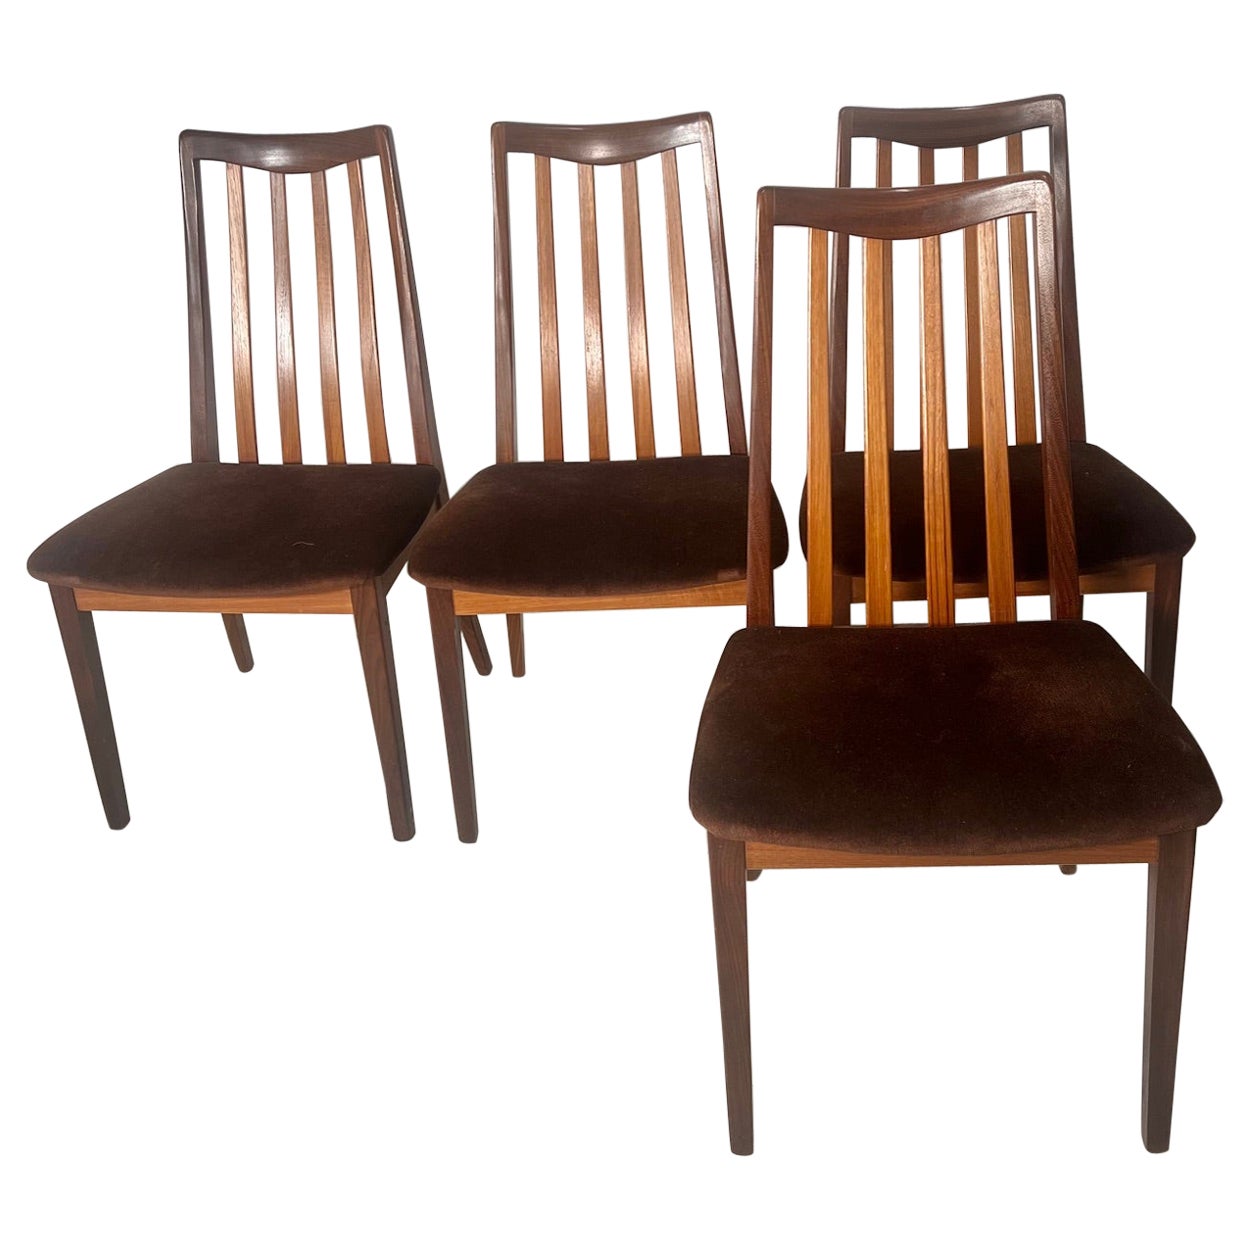 G Plan Furniture Dining Room Chairs